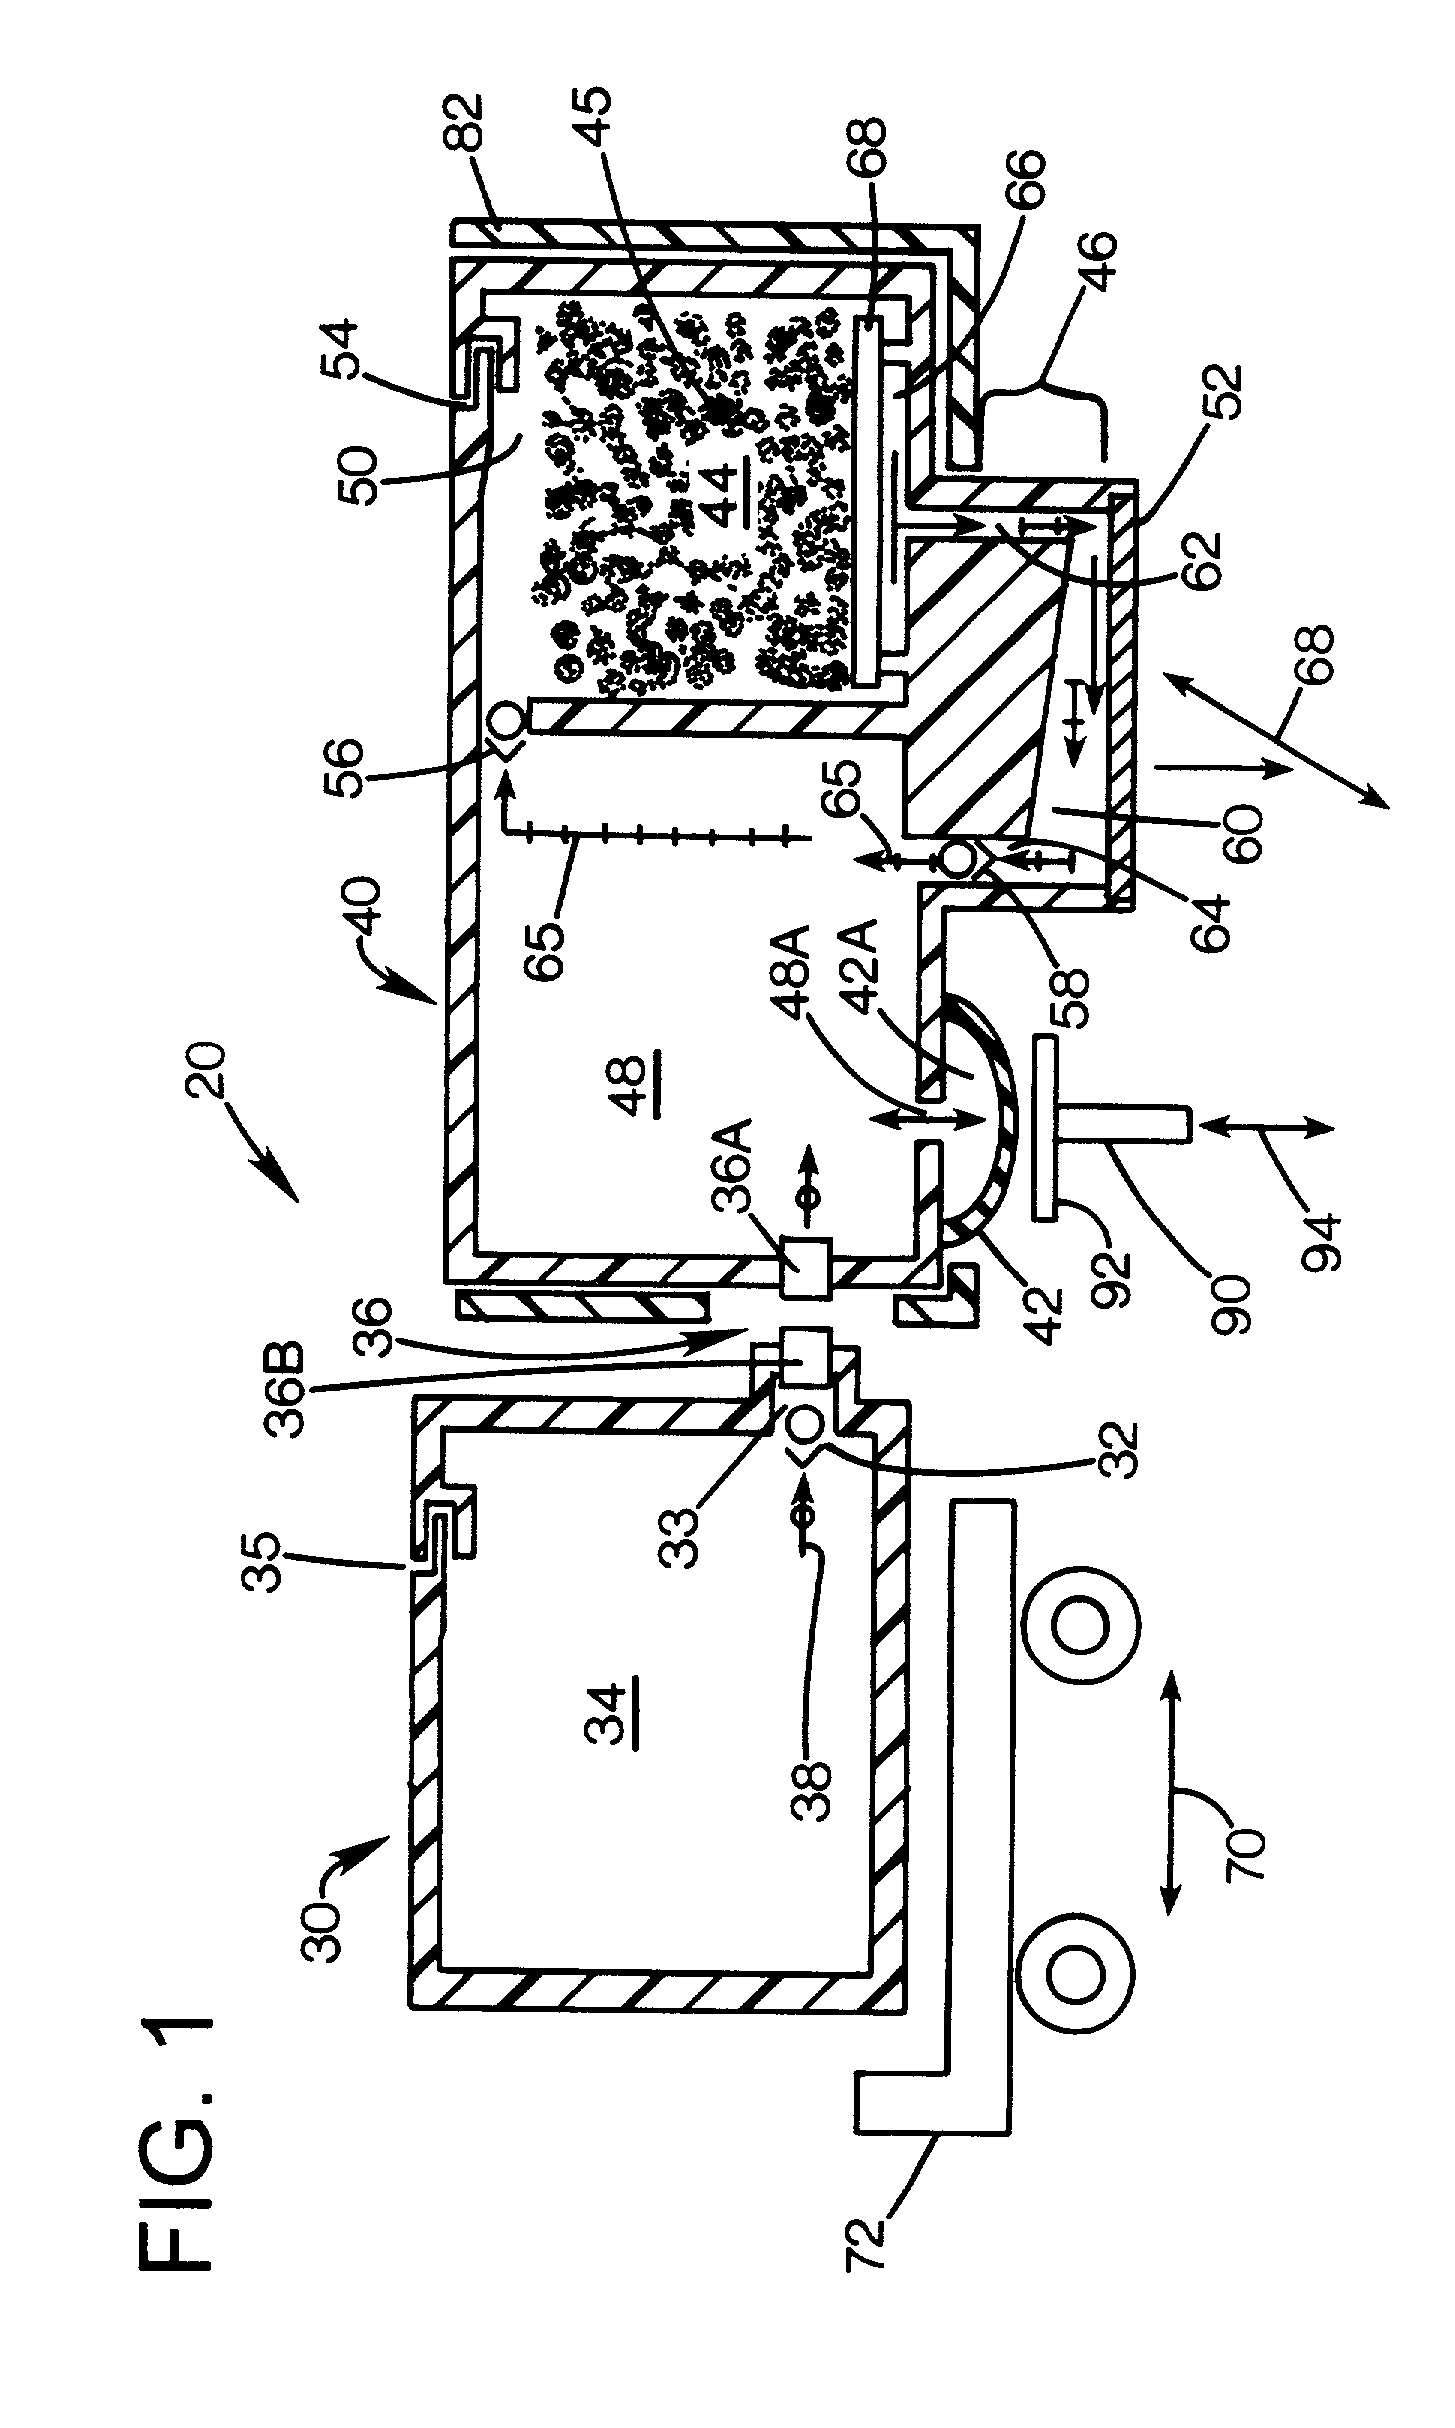 Re-circulating fluid delivery systems